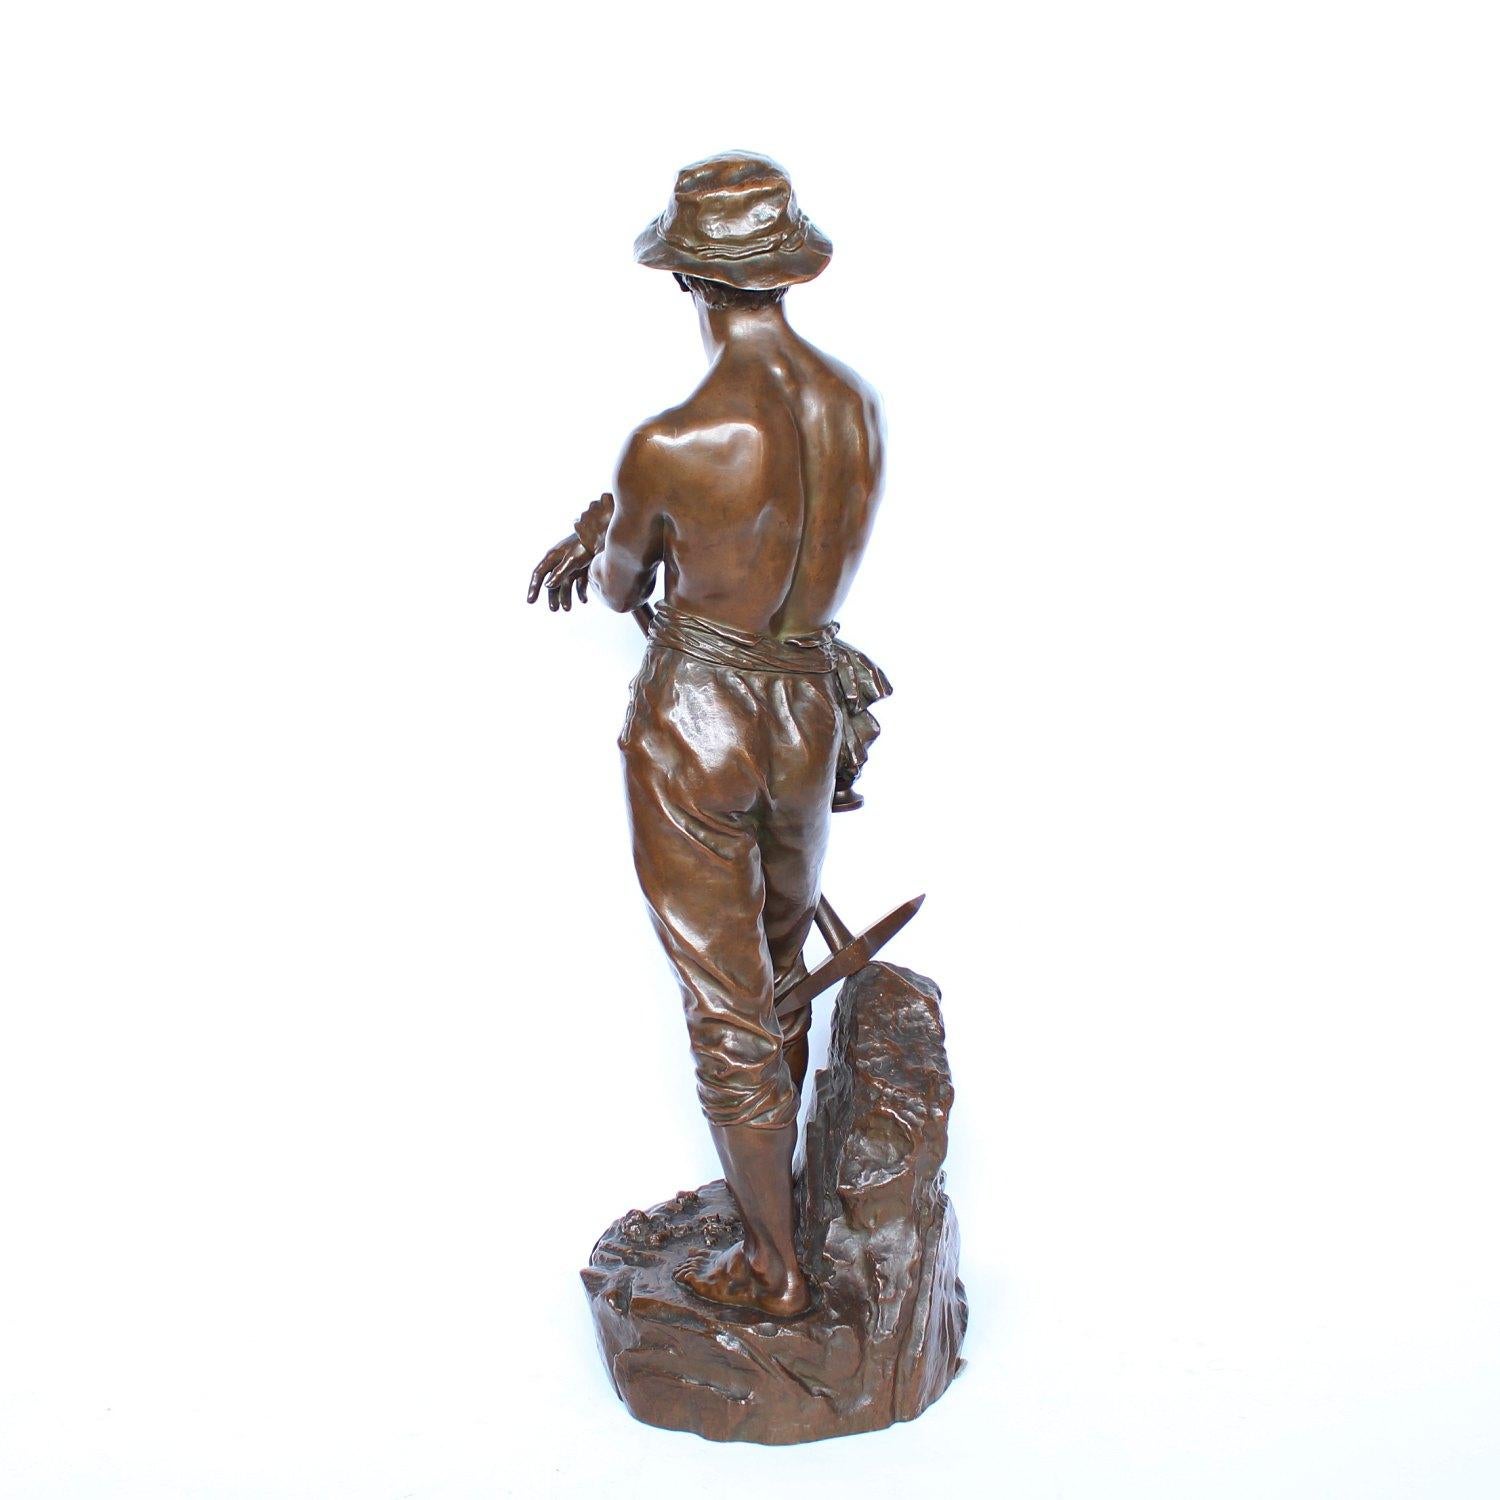 Aesthetic Movement 19th Century 1 Metre Tall Bronze Sculpture of a Bare Chested Man, France 1890